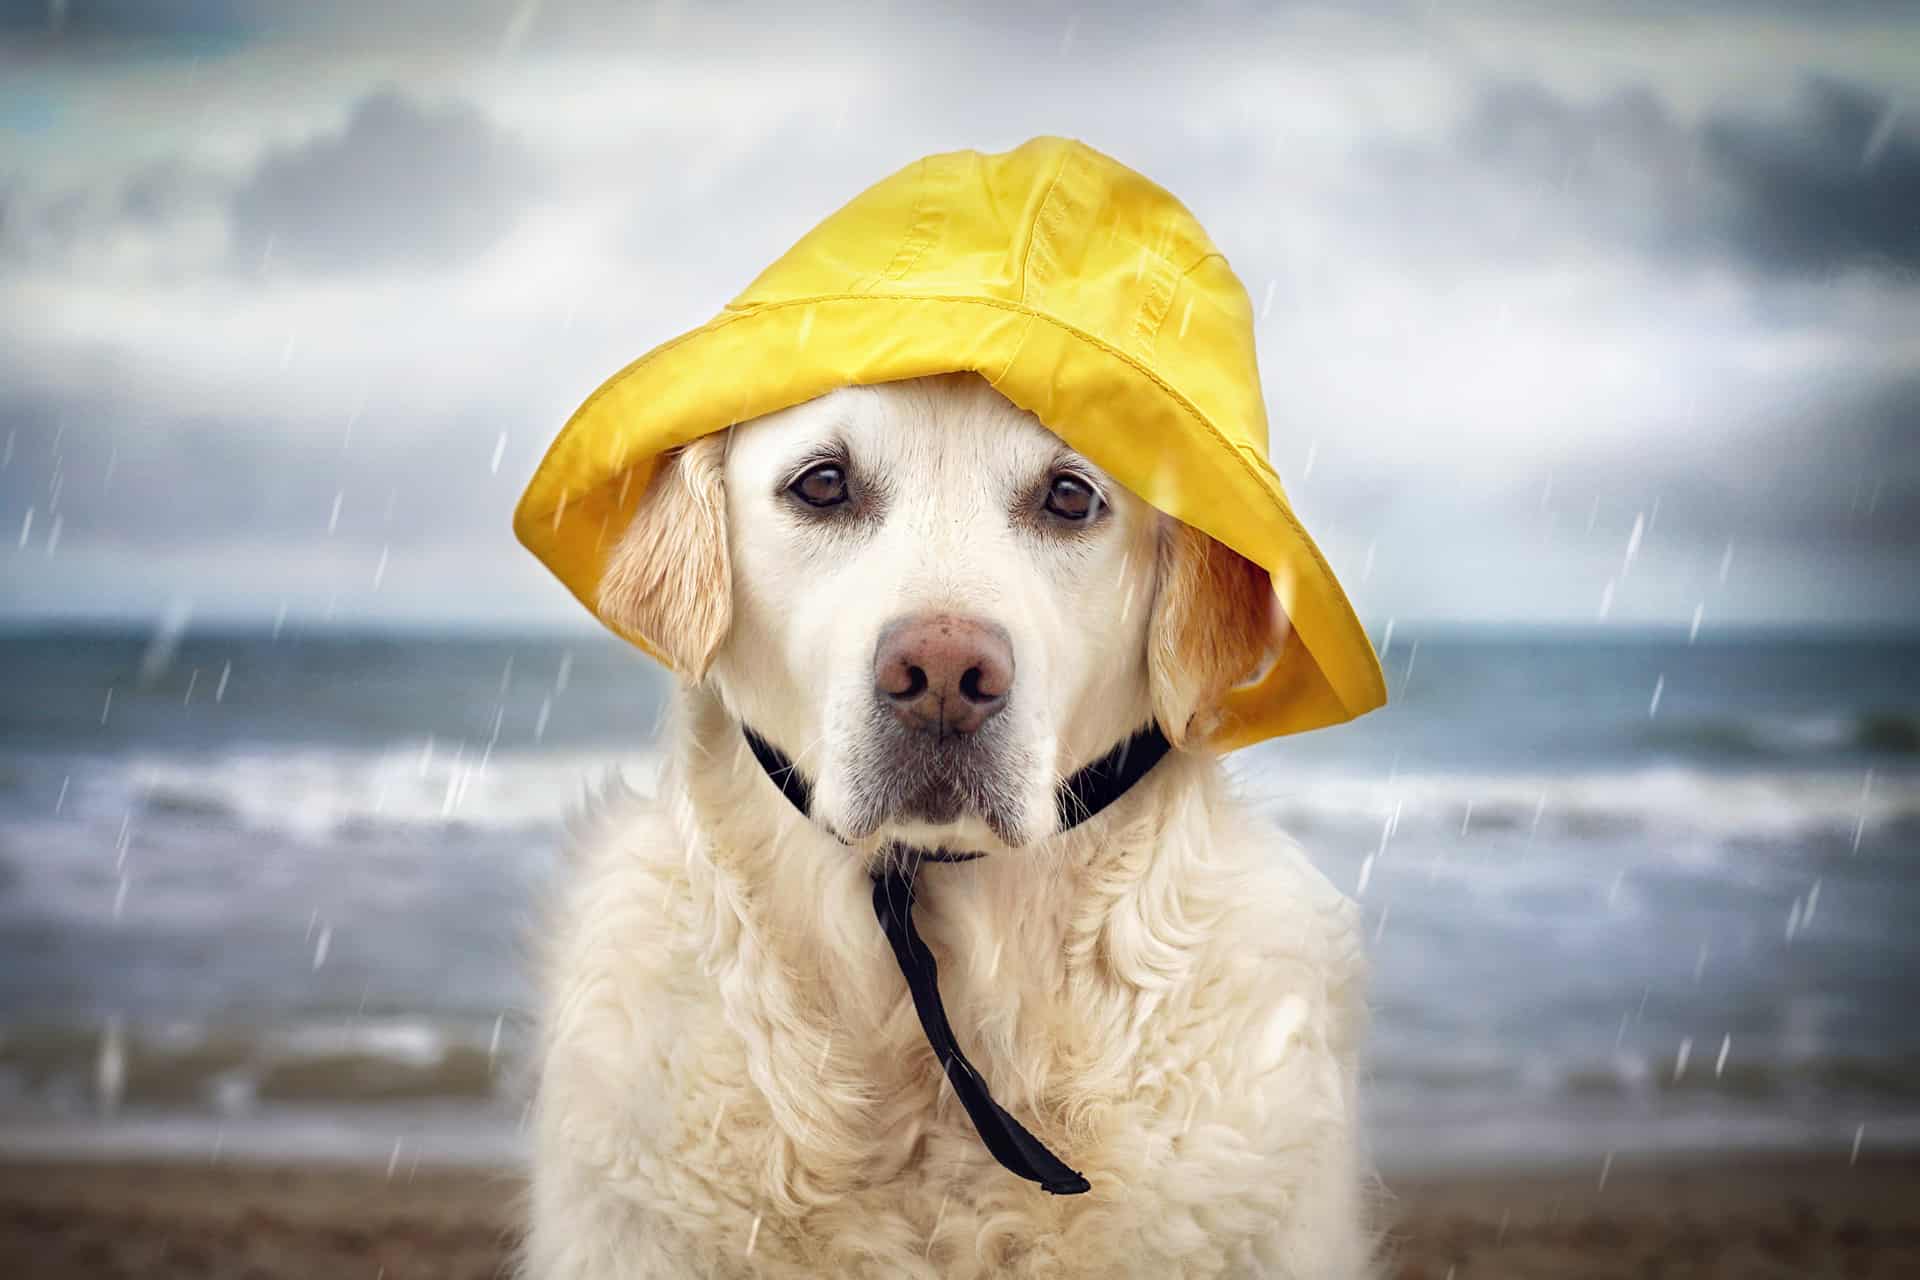 A dog wearing a rain hat in a storm to illustrate the concern of buying a house in a flood zone